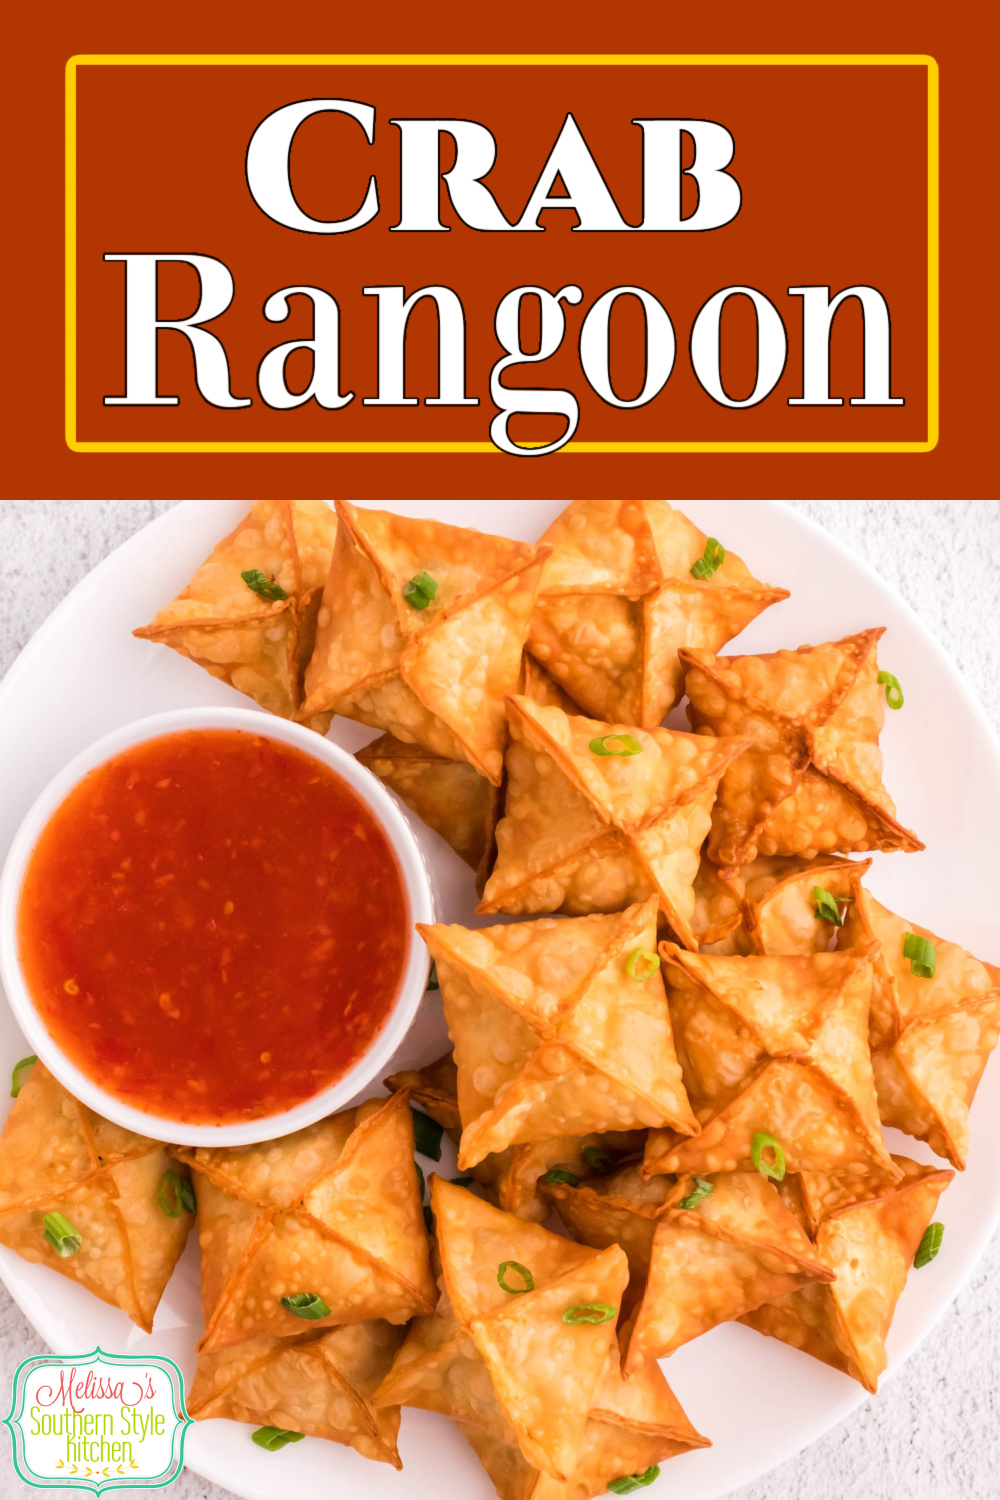 These Crab Rangoon are better than any you'll pay top dollar for at a restaurant. Serve them with sweet Asian chili sauce on the side for dipping #crabrangoon #jumbolumpcrab #easycrabrecipes #rangoon #copycatcrabrangoon #appetizers #crabappetizers #copycatpfchangsrangoon via @melissasssk